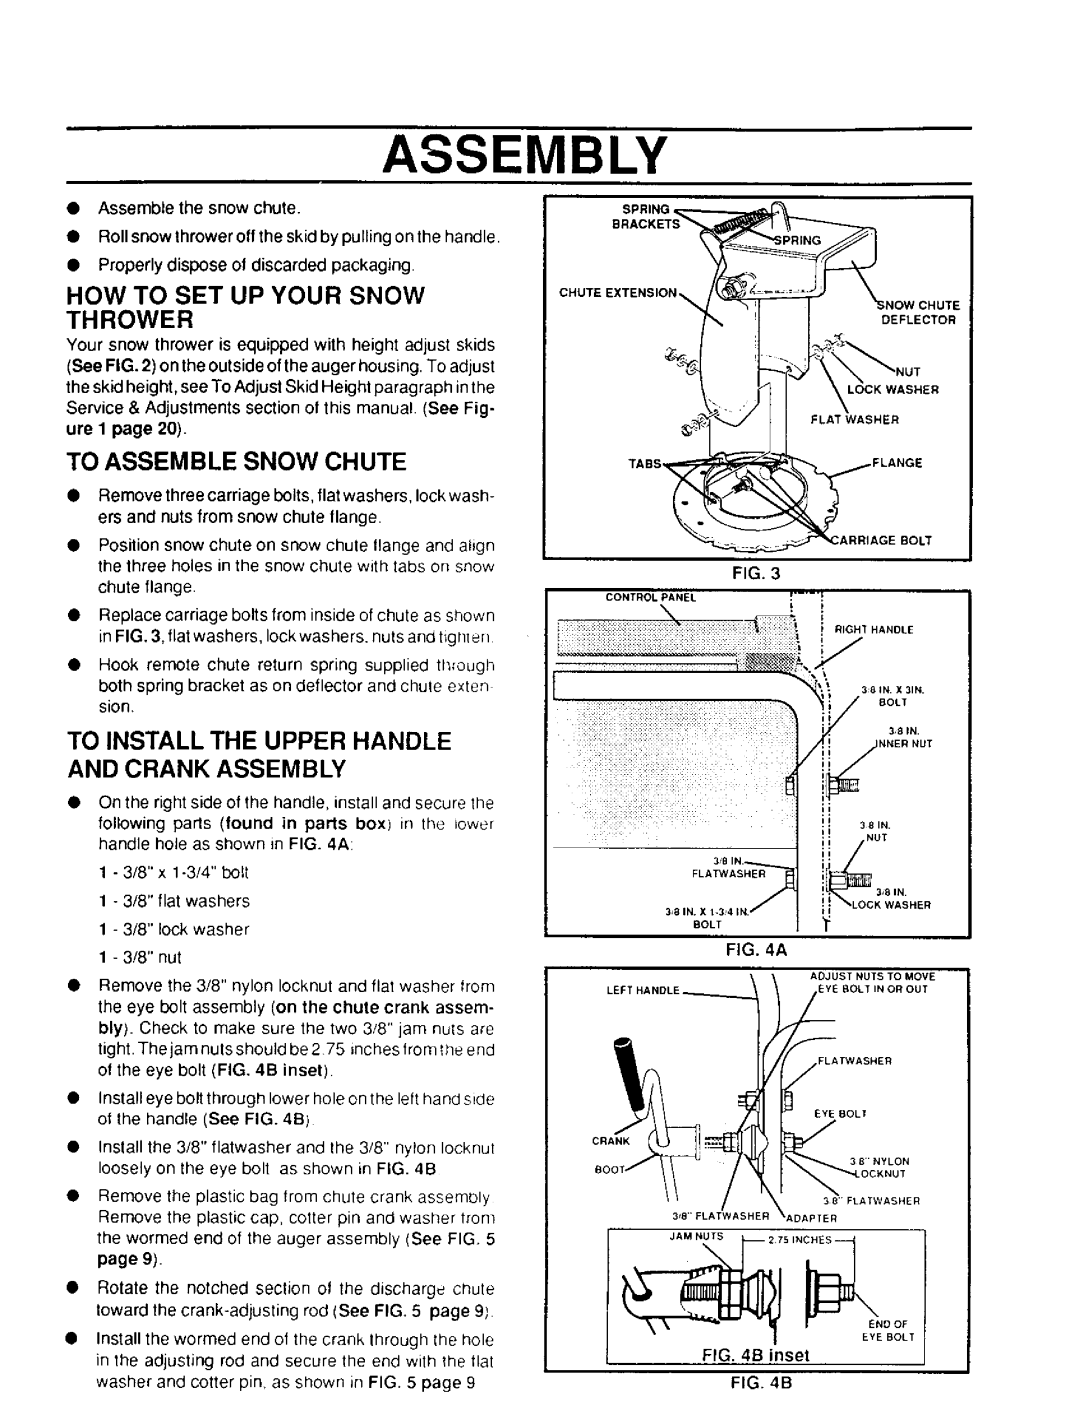 Sears 536.886331 How To Set Up Your Snow Thrower, To Assemble Snow Chute, To Install The Upper Handle And Crank Assembly 